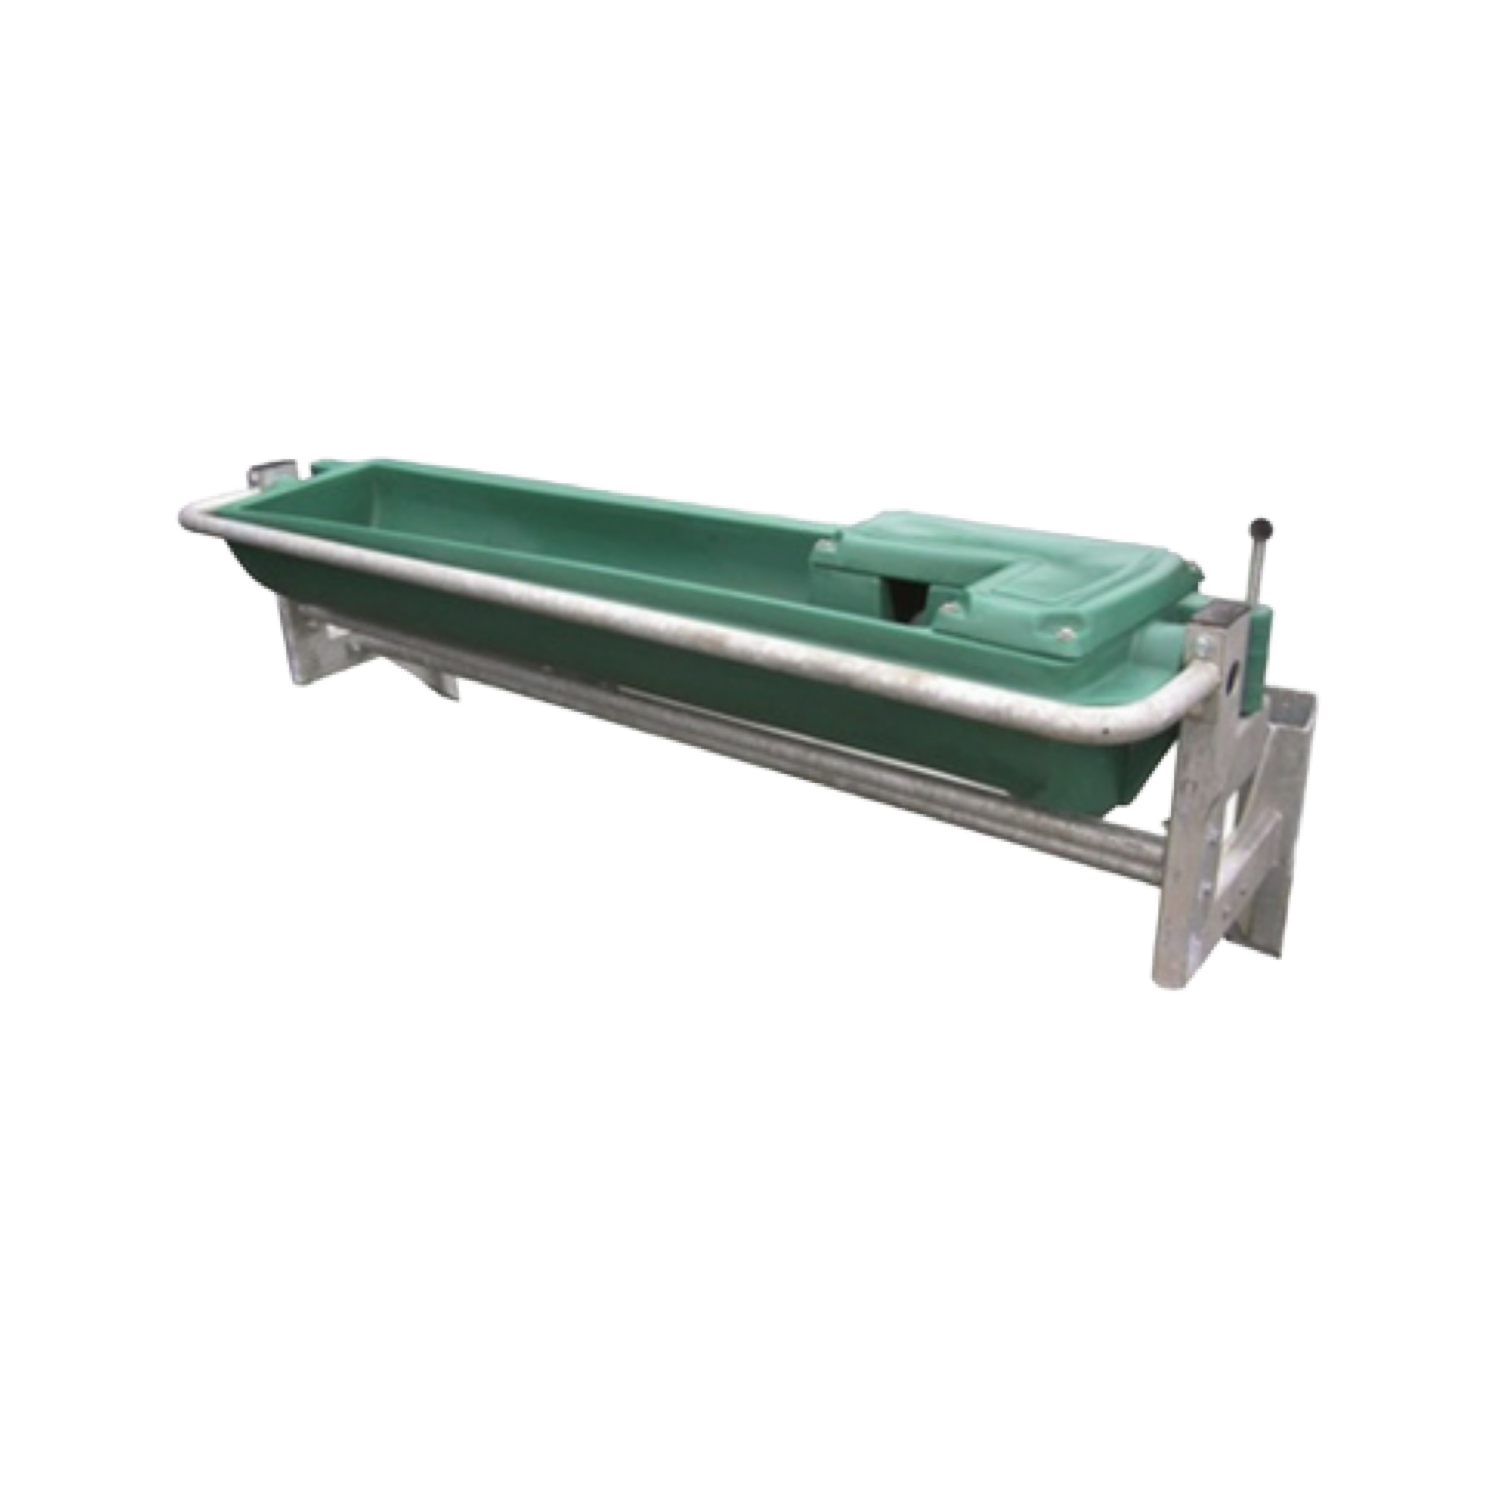 Drainage Trough with Heating Option1